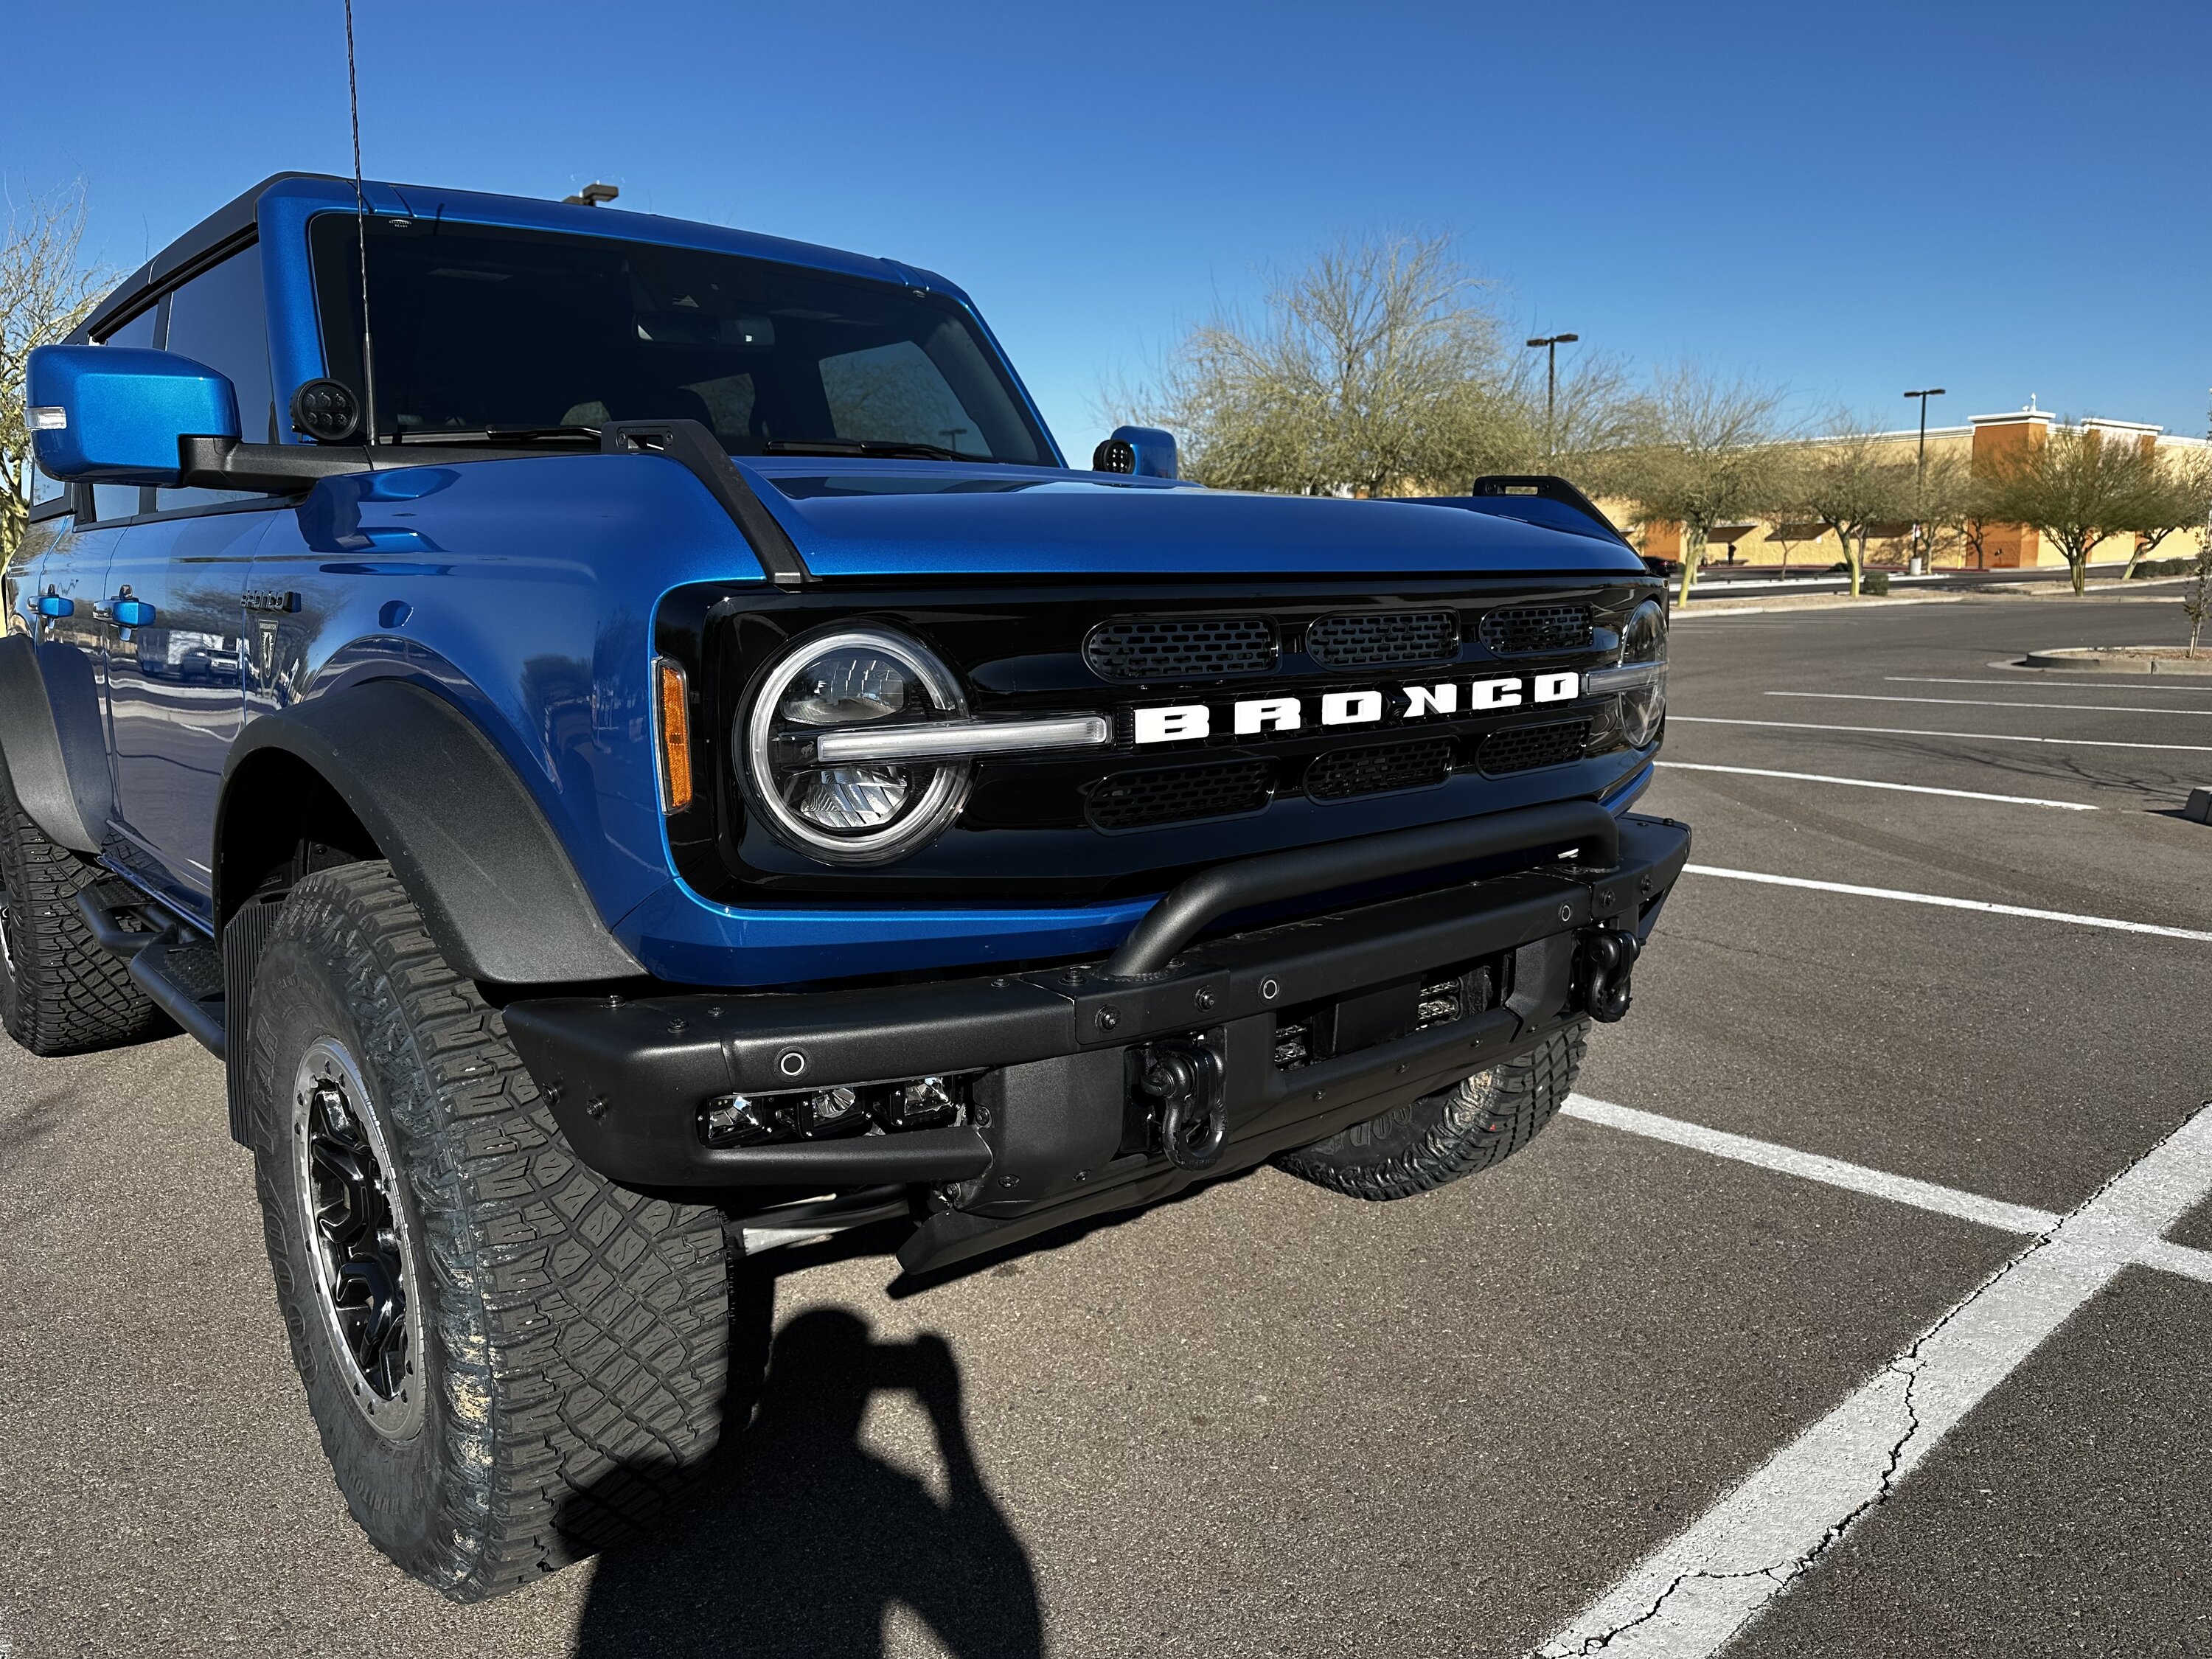 Ford Bronco Mesh grill inserts installed on Big Bend 51D5C46E-725F-4DDE-831E-7935AC19AED0